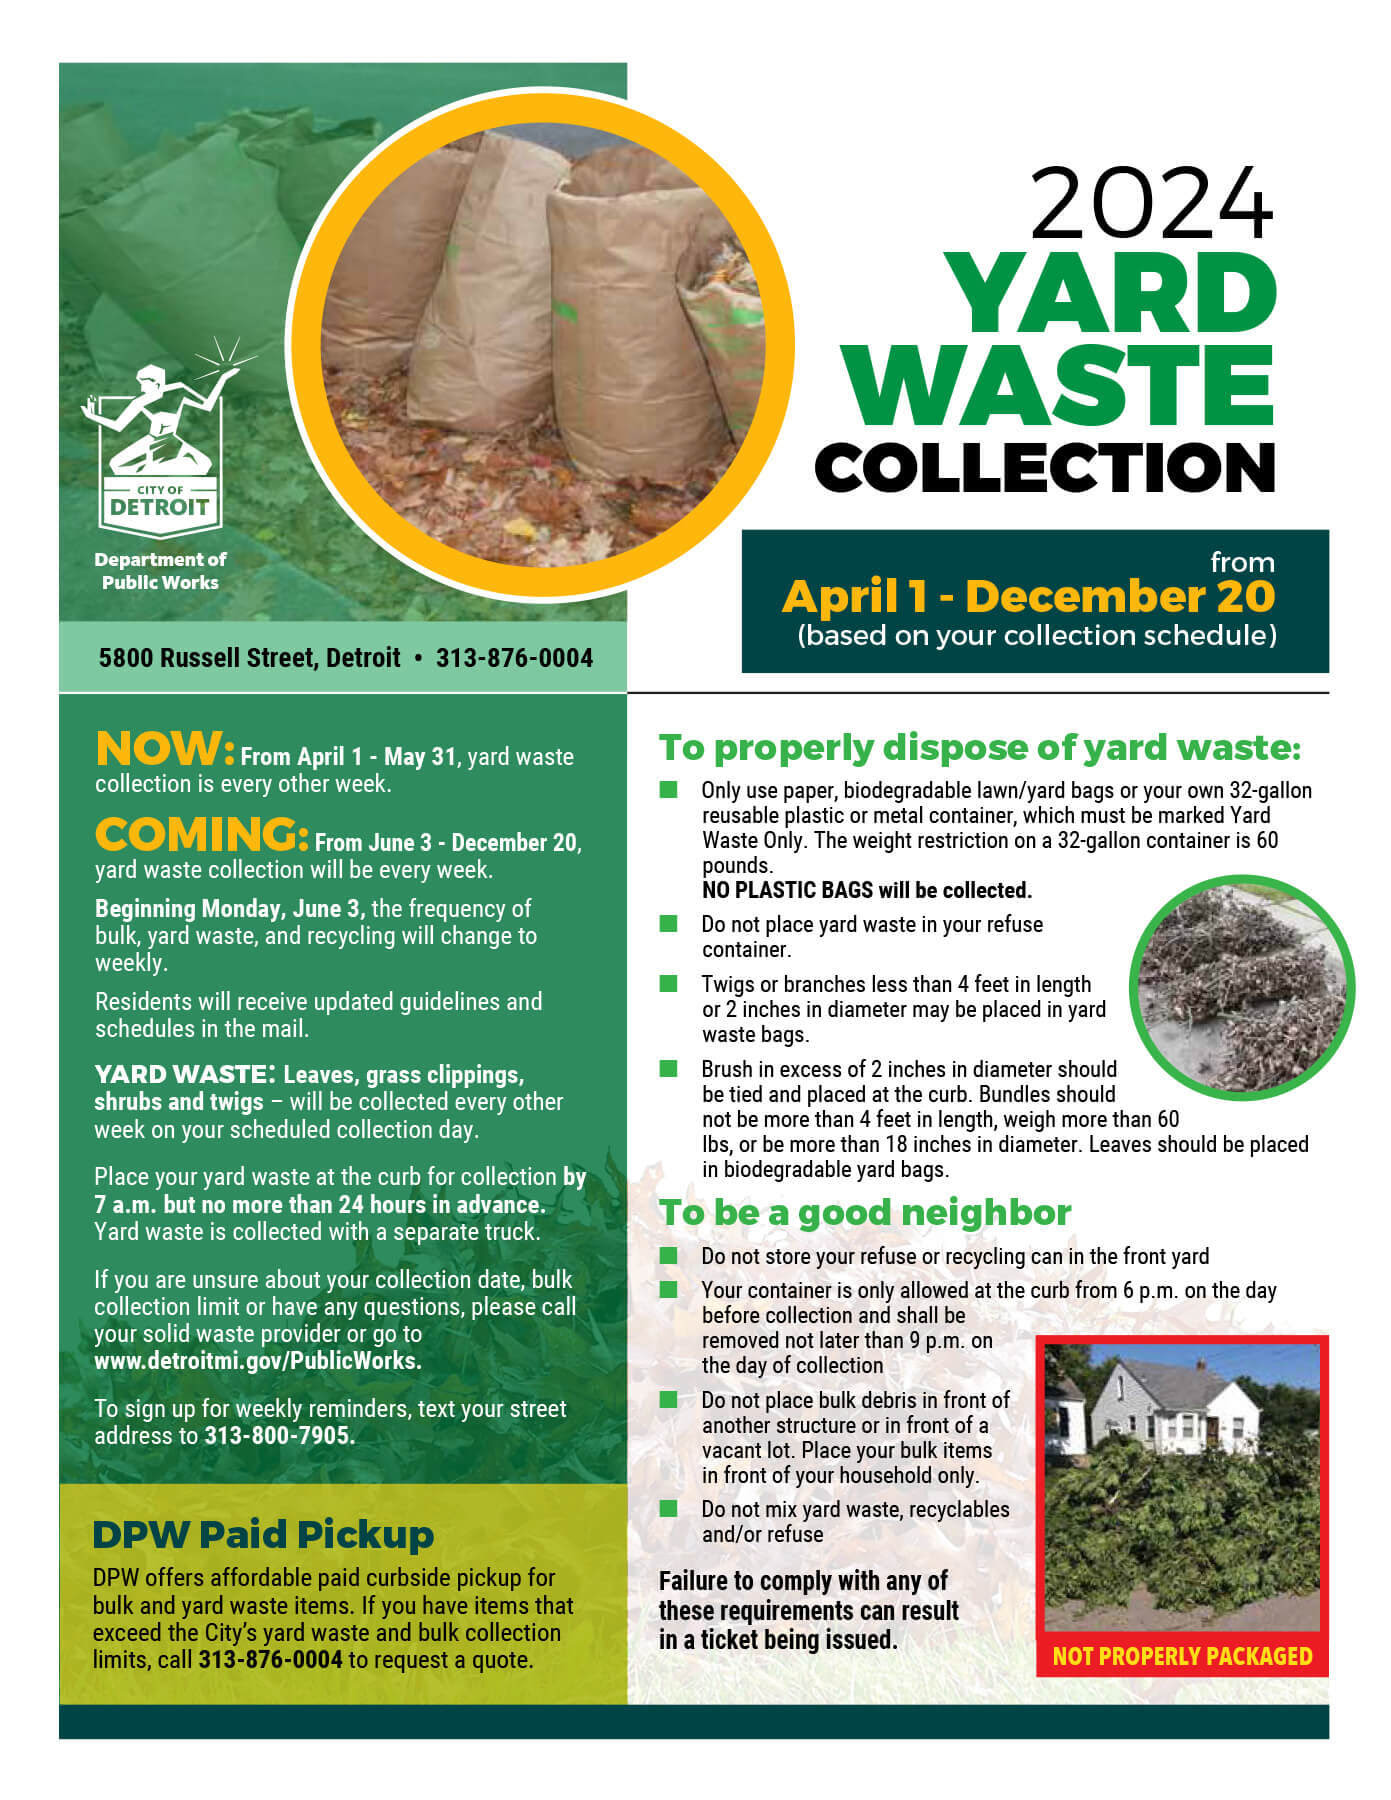 Yard Waste Collection 2024